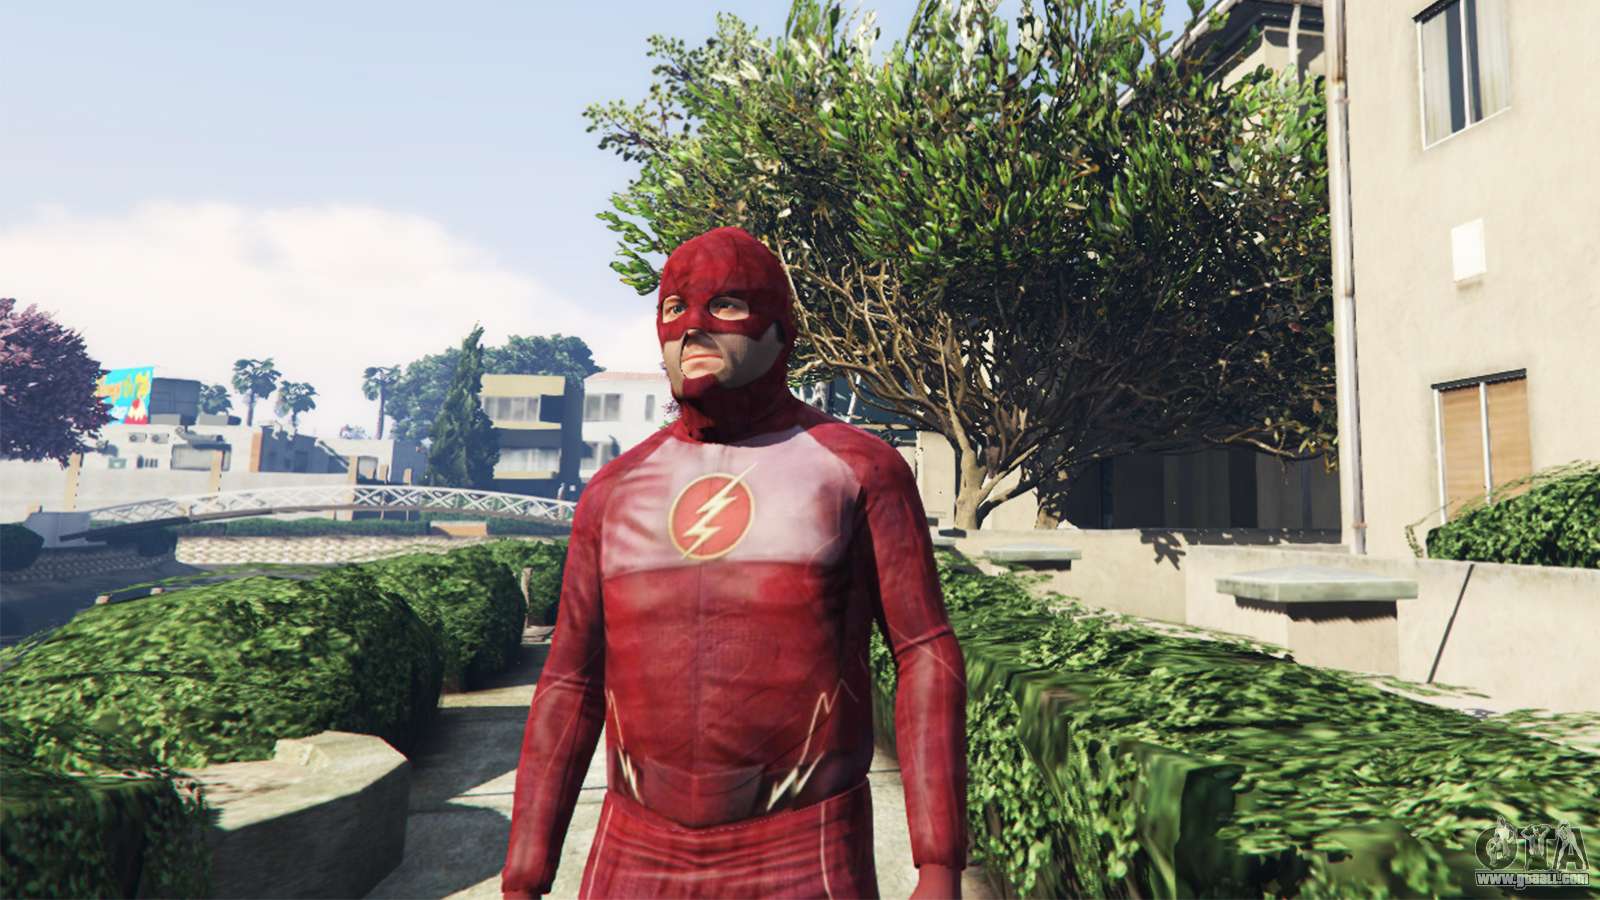 The Flash Costume for GTA 5